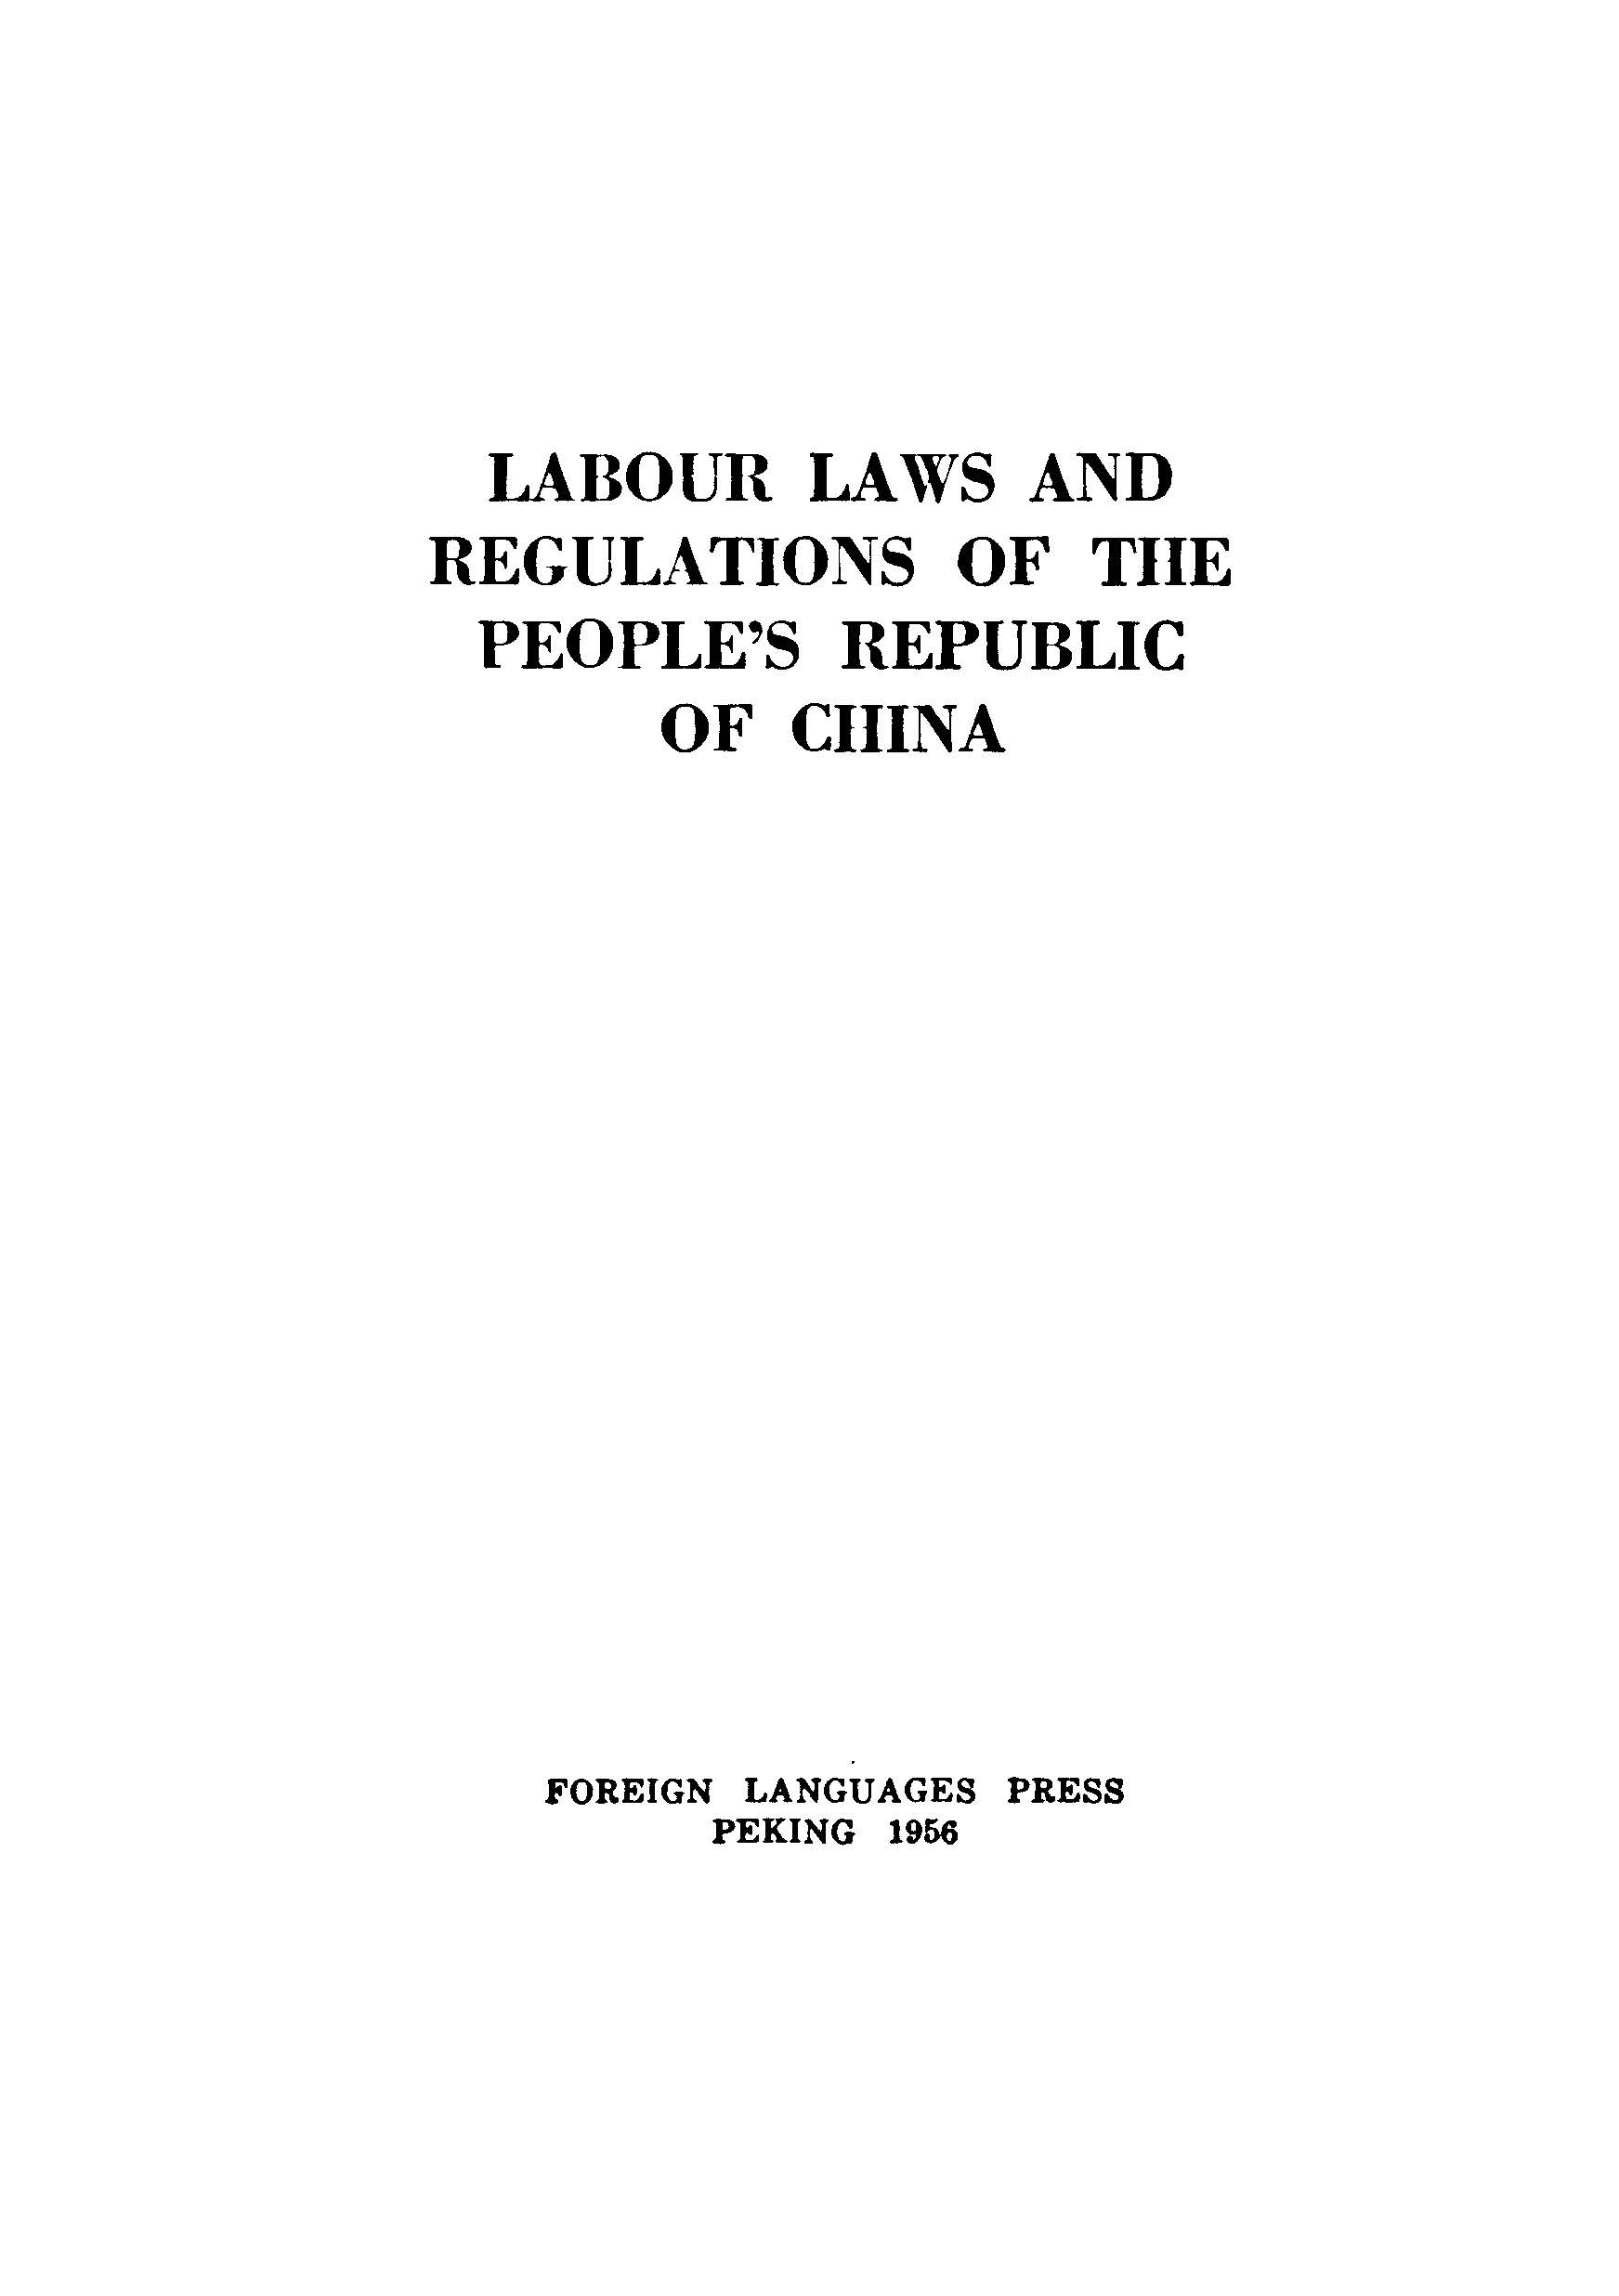 Labour laws and regulations of the people's republic of china